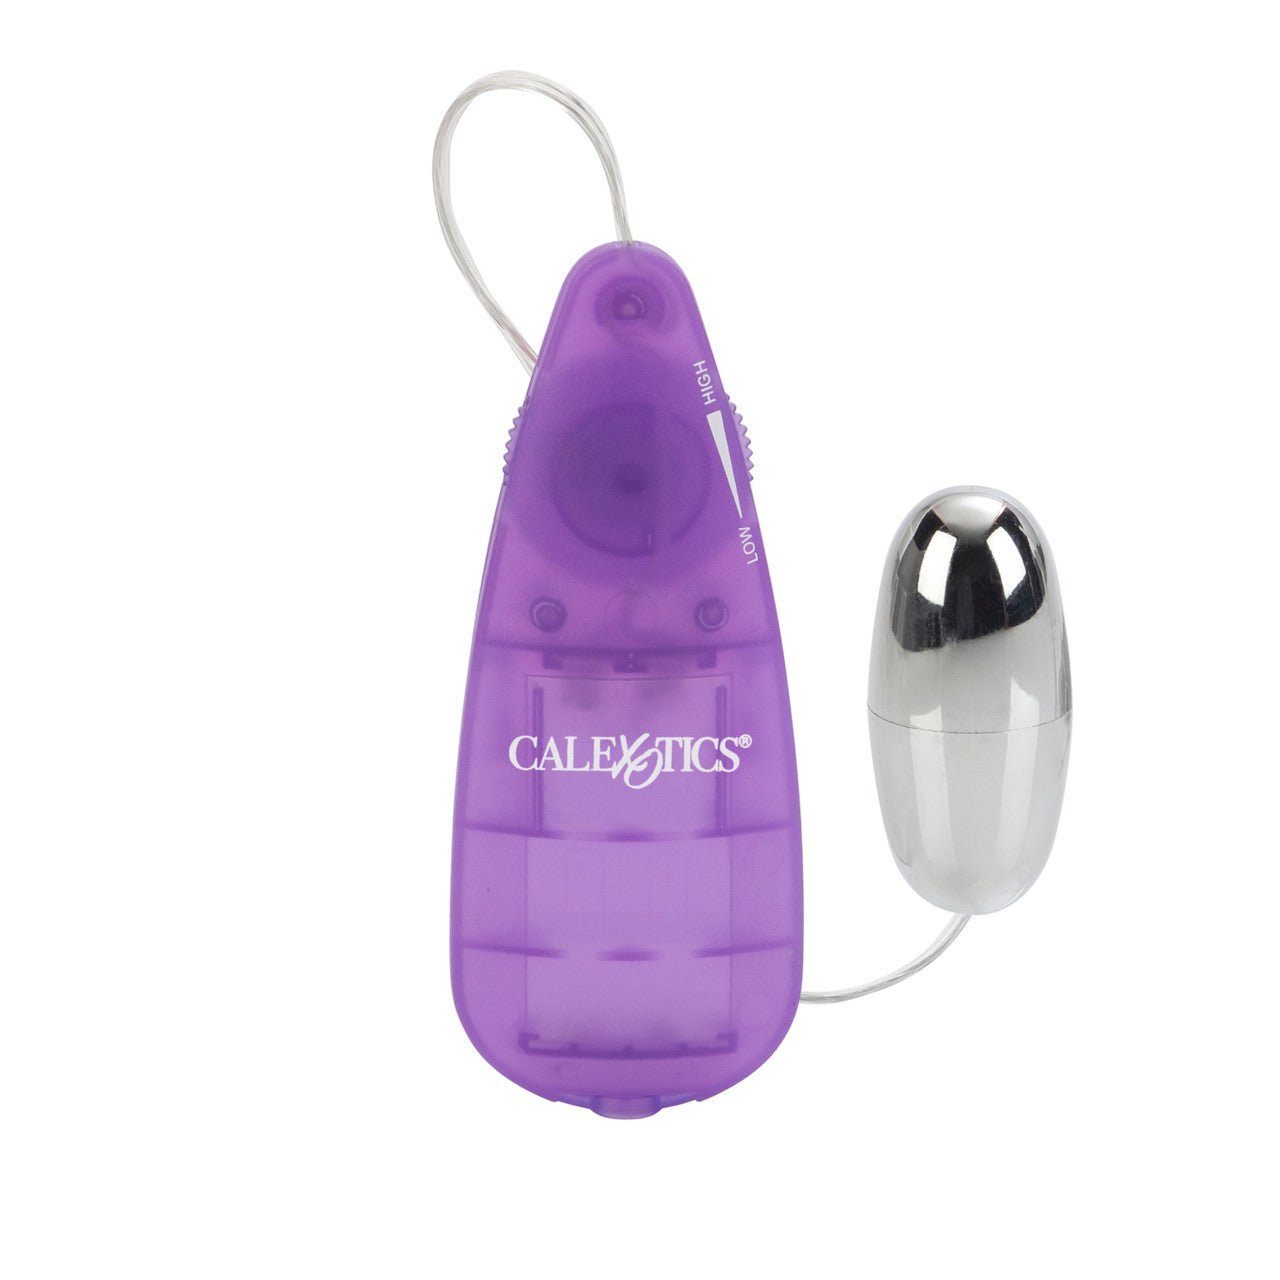 Her Anal Kit Silicone Rocker Probe and Beads Anal Vibrator